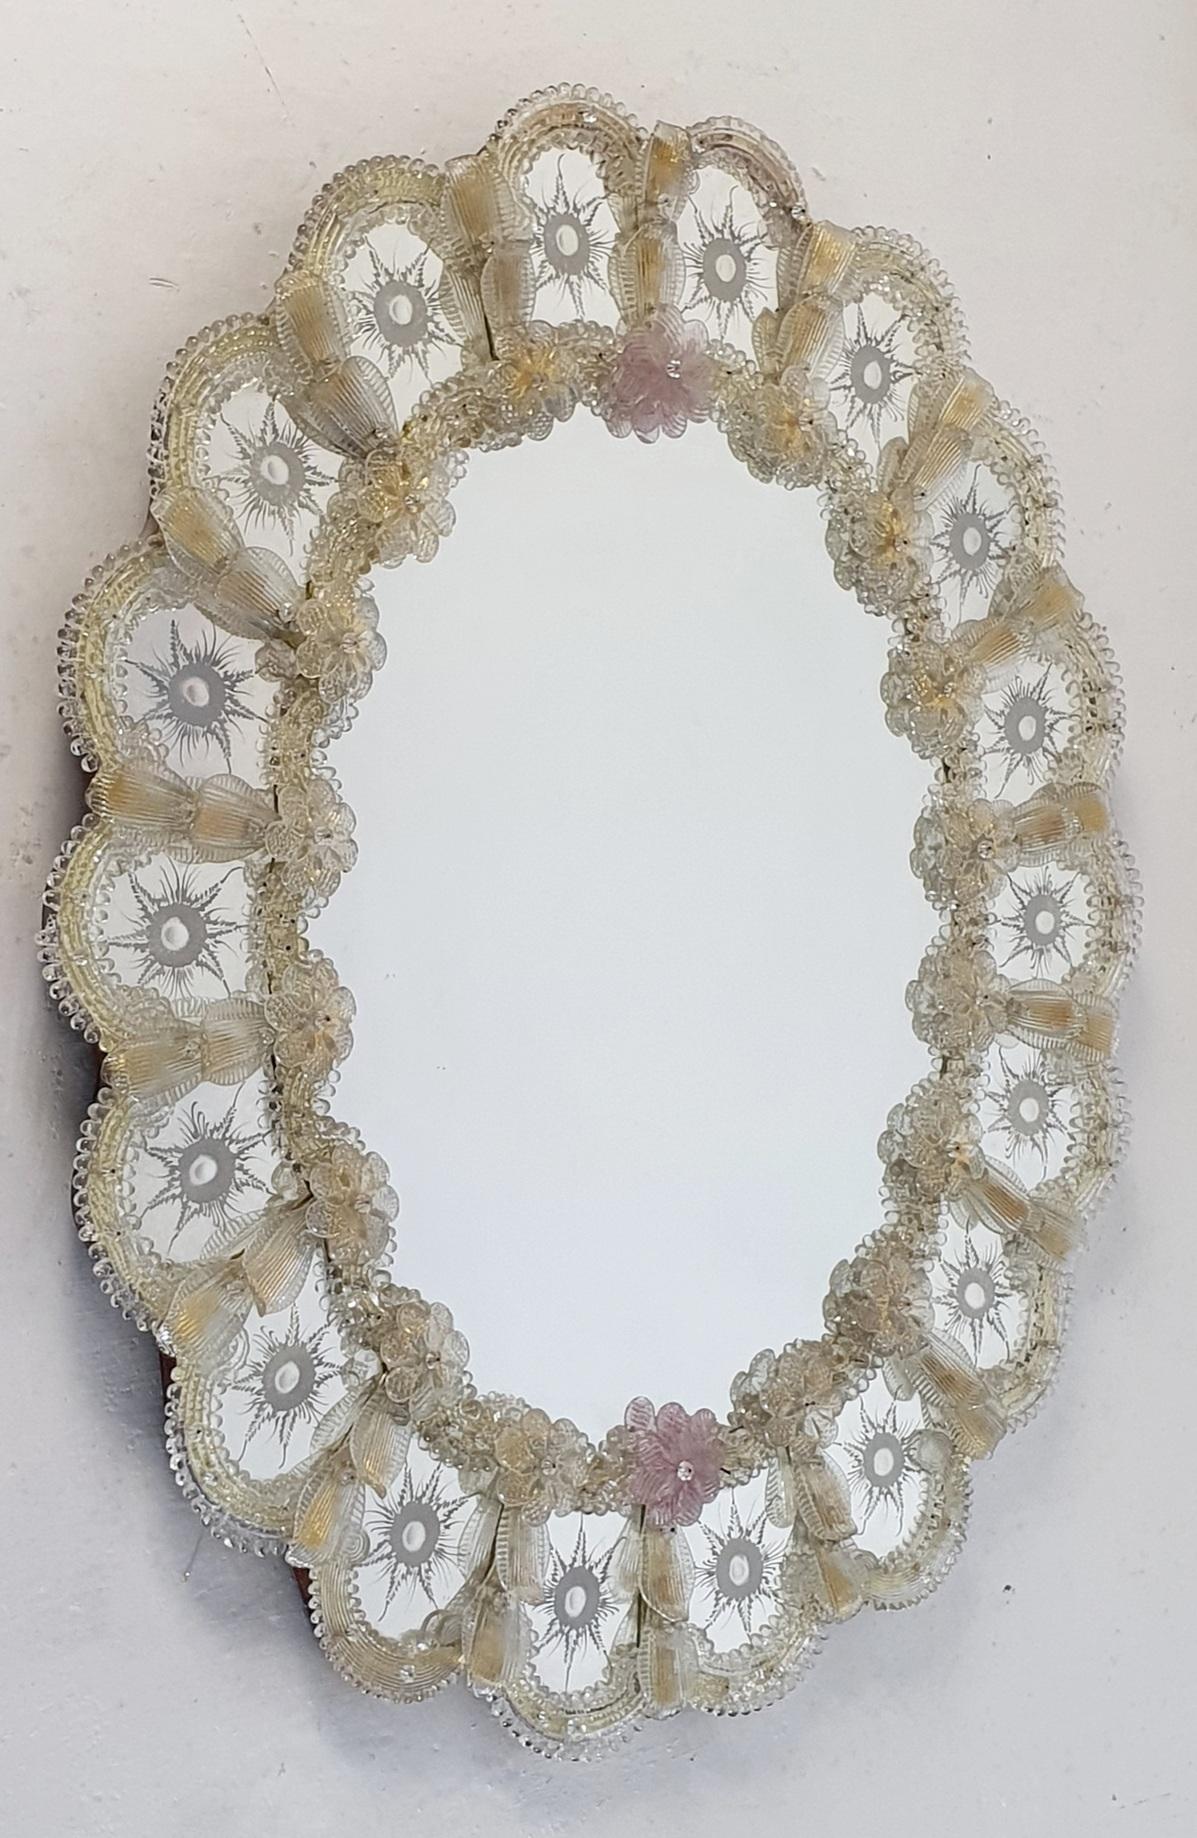 Oval Venetian mirror, made in beautiful clear and pale yellow Murano glass which is hand engraved. Made in the traditional way with the glass mounted on a wooden frame with a natural finish. Exquisite form and superb quality!